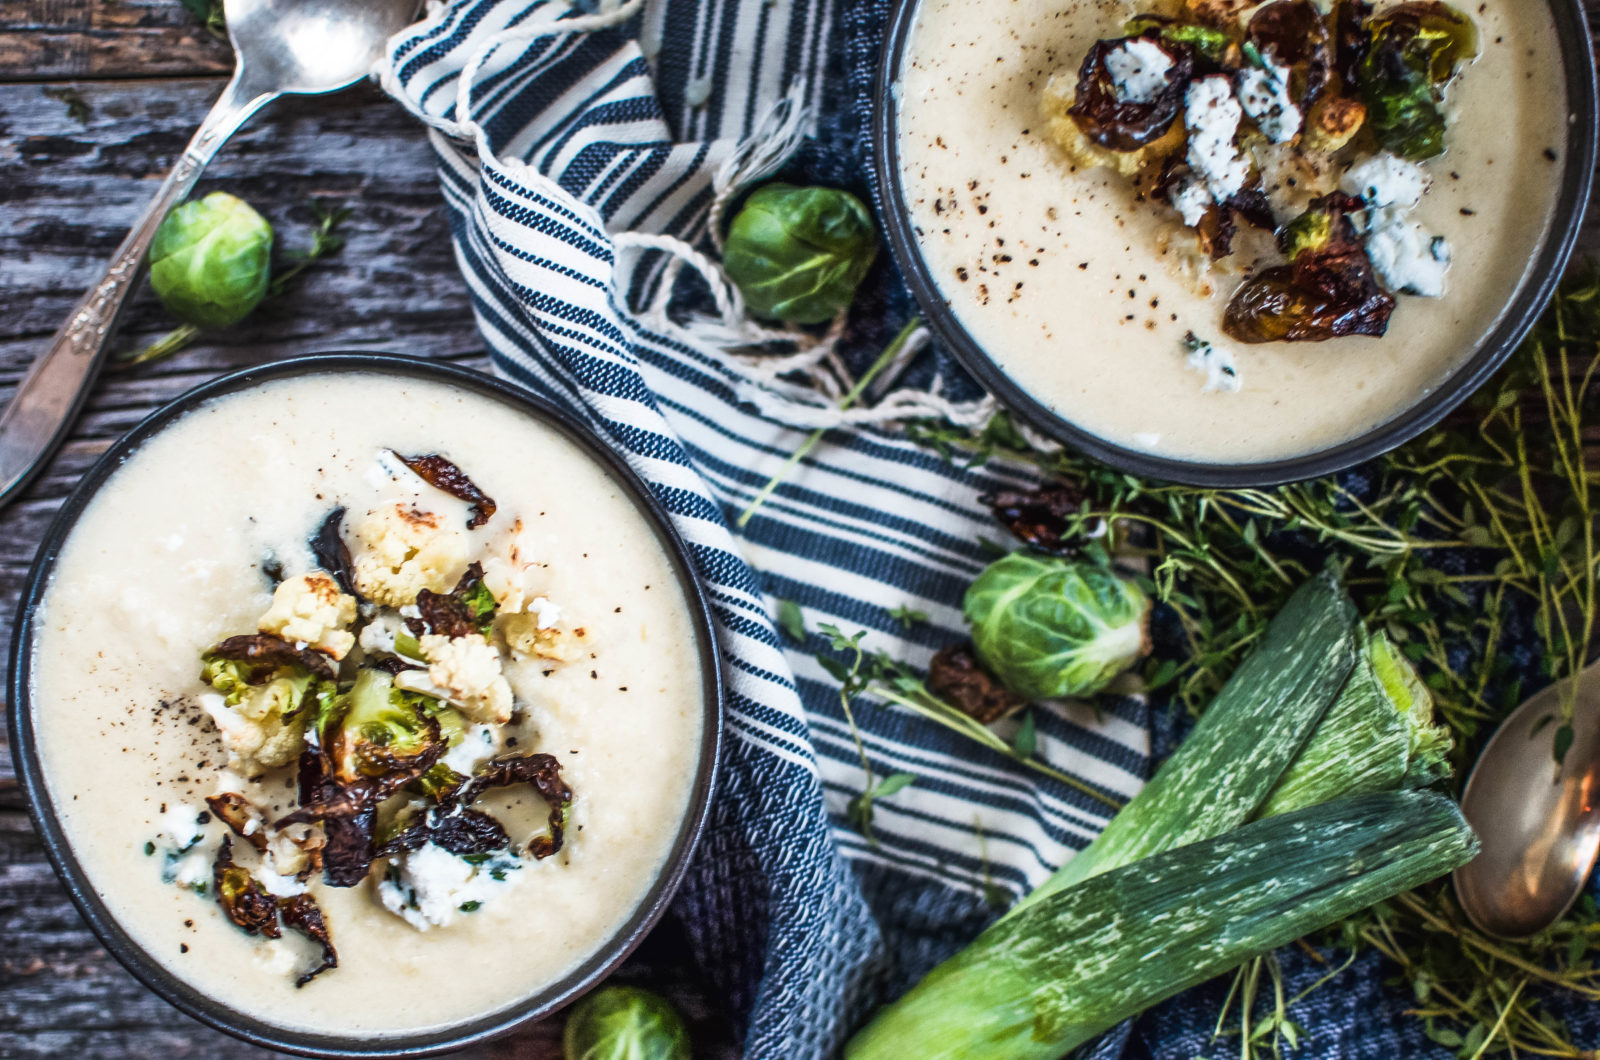 A decadent, rich cauliflower soup topped with crispy Brussels sprout leaves, cauliflower florets and herbed goat cheese.